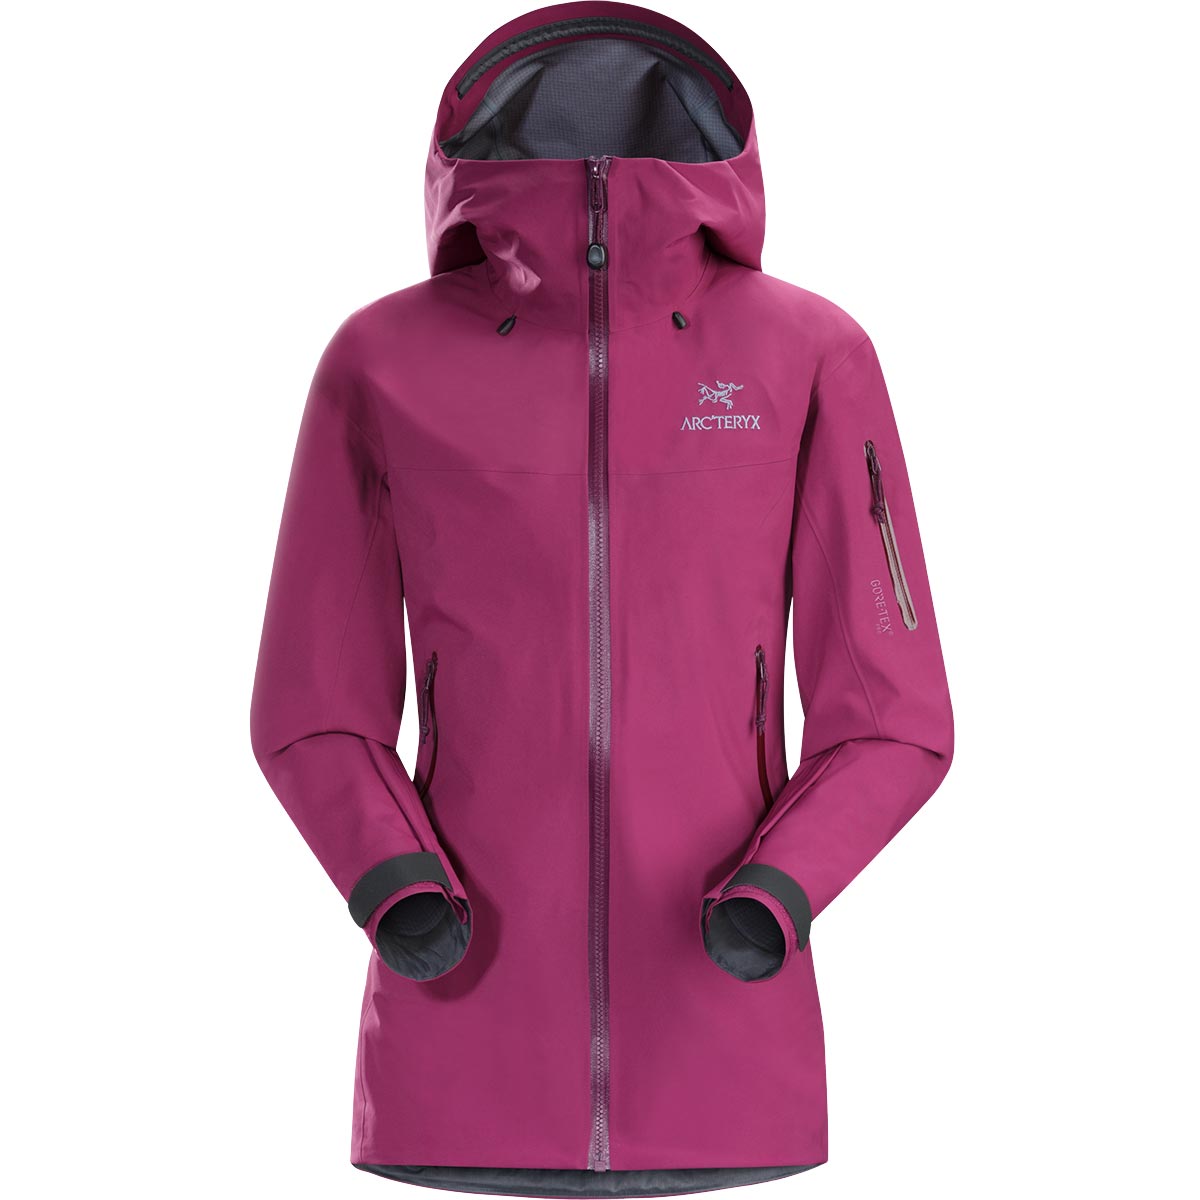 Beta SV Jacket, women's, discontinued Spring 2018 colors